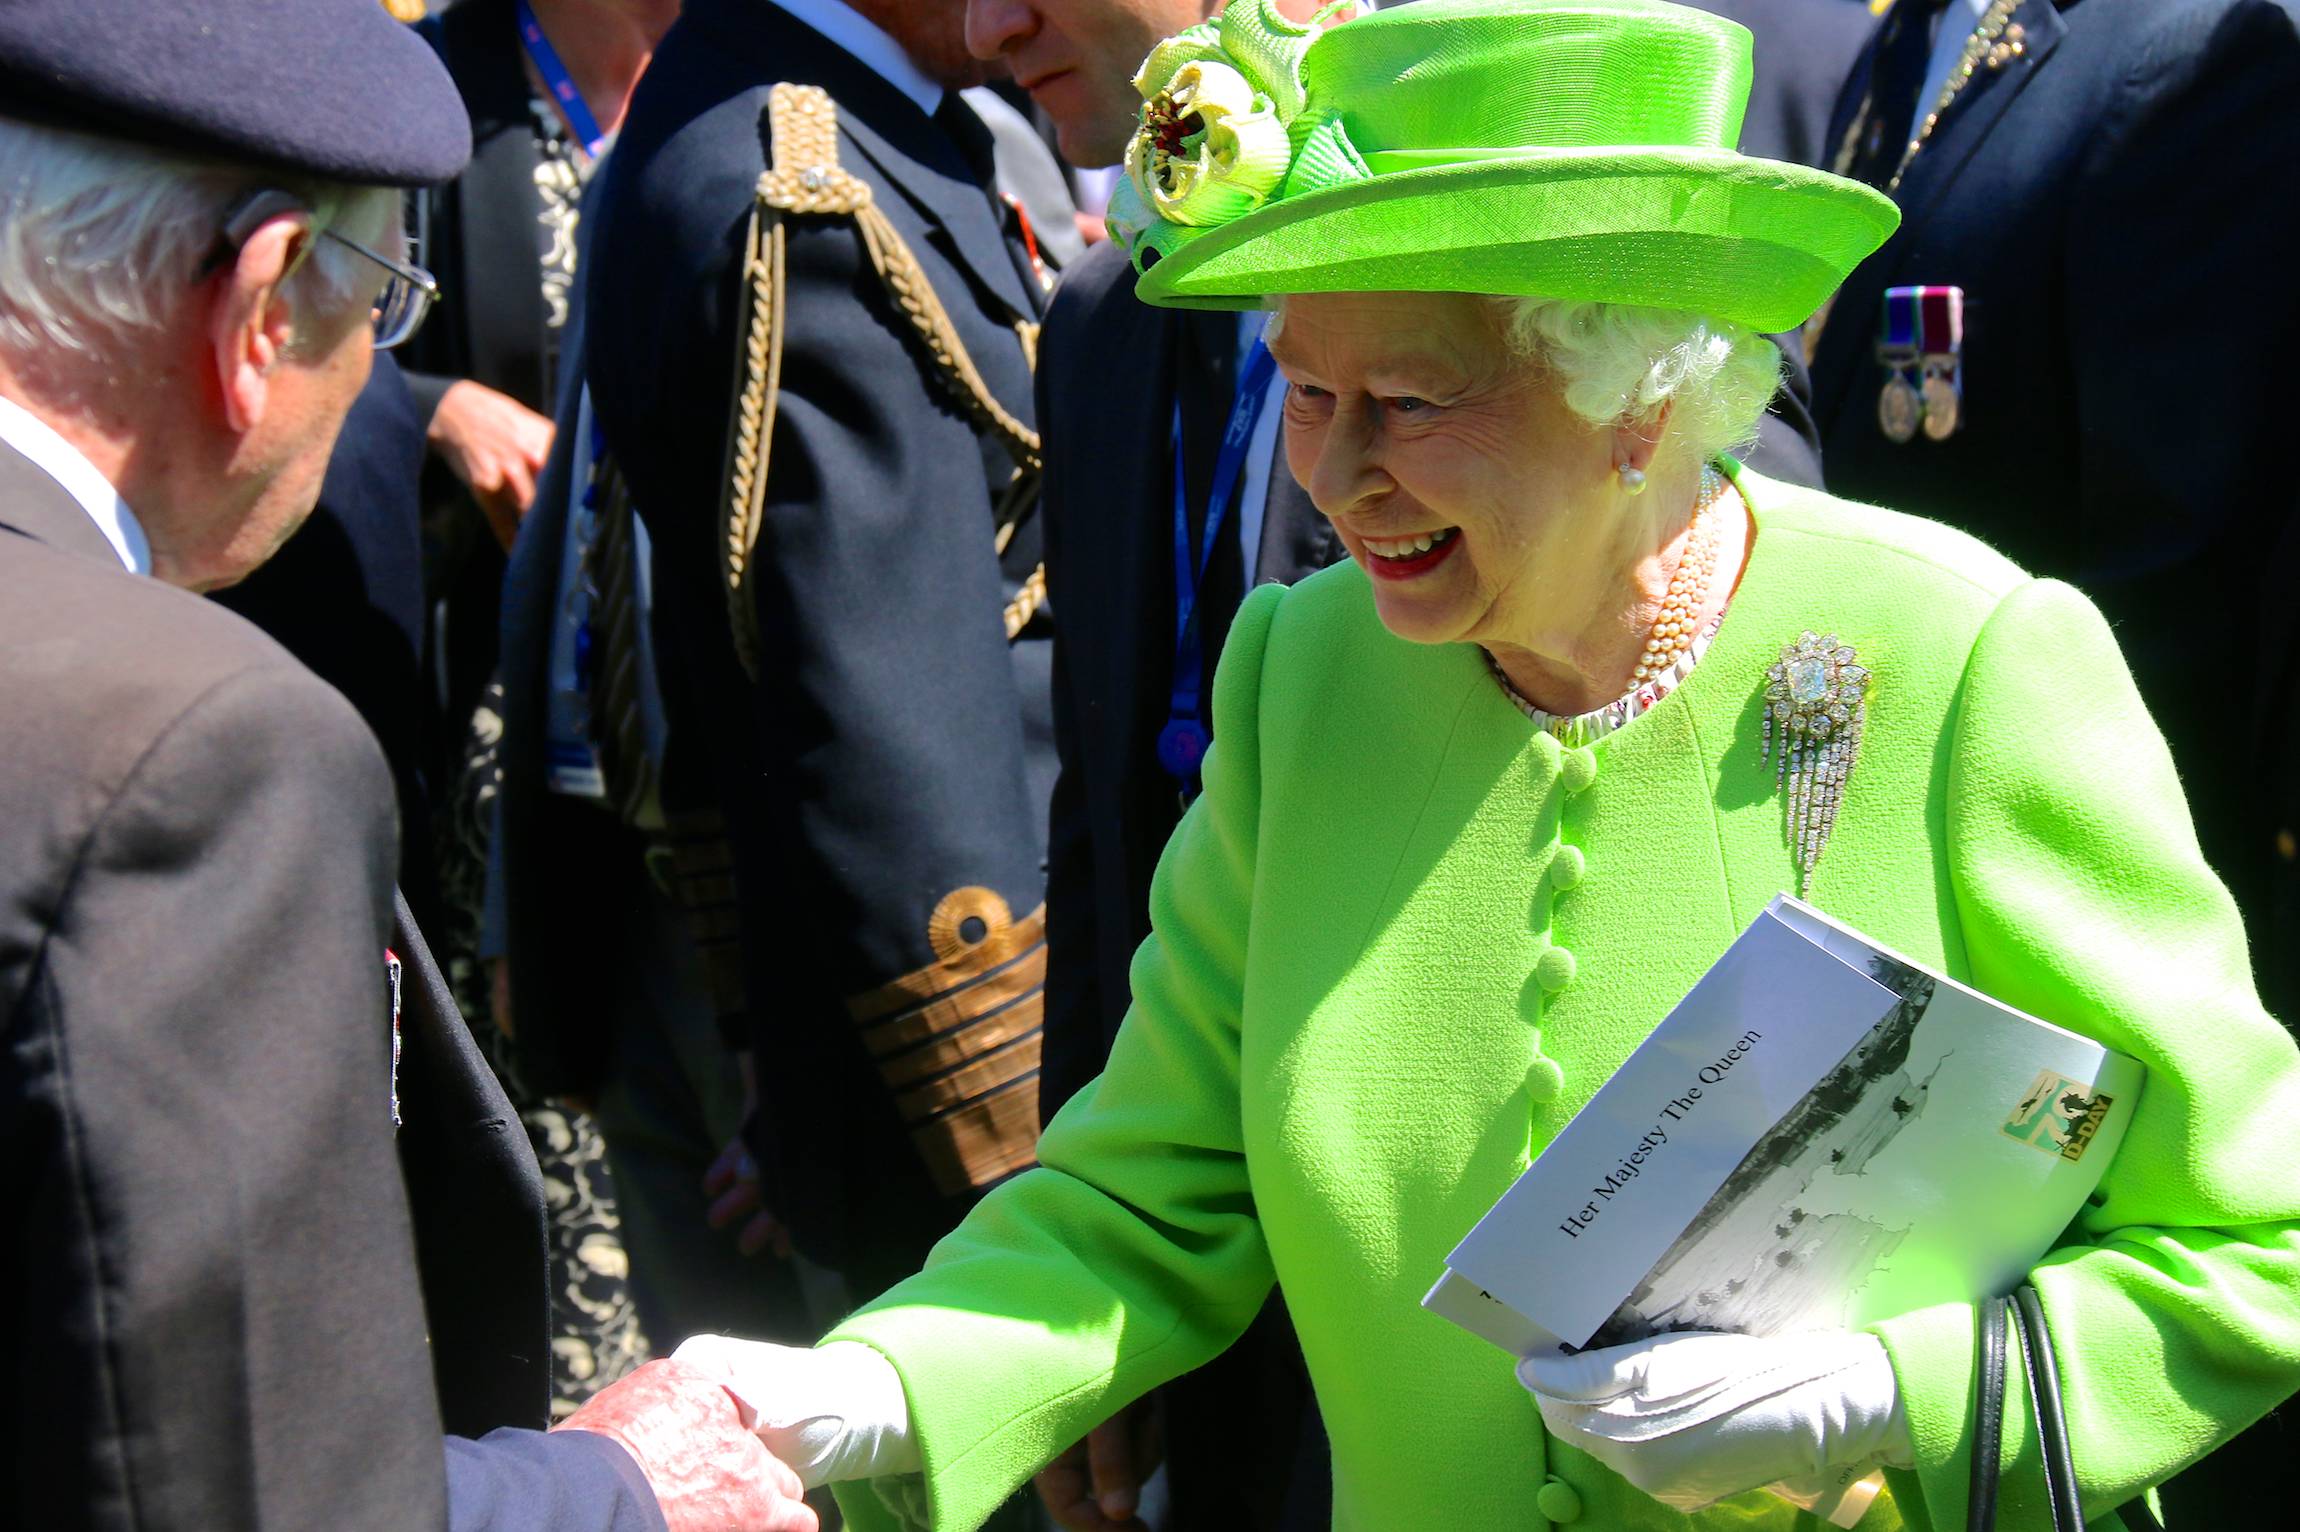 Queen Elisabeth II greets a veteran after the Franco-British Ceremony of the 70th anniversary of D-Day, on the Bayeux Cemetery in France, June 6, 2014.